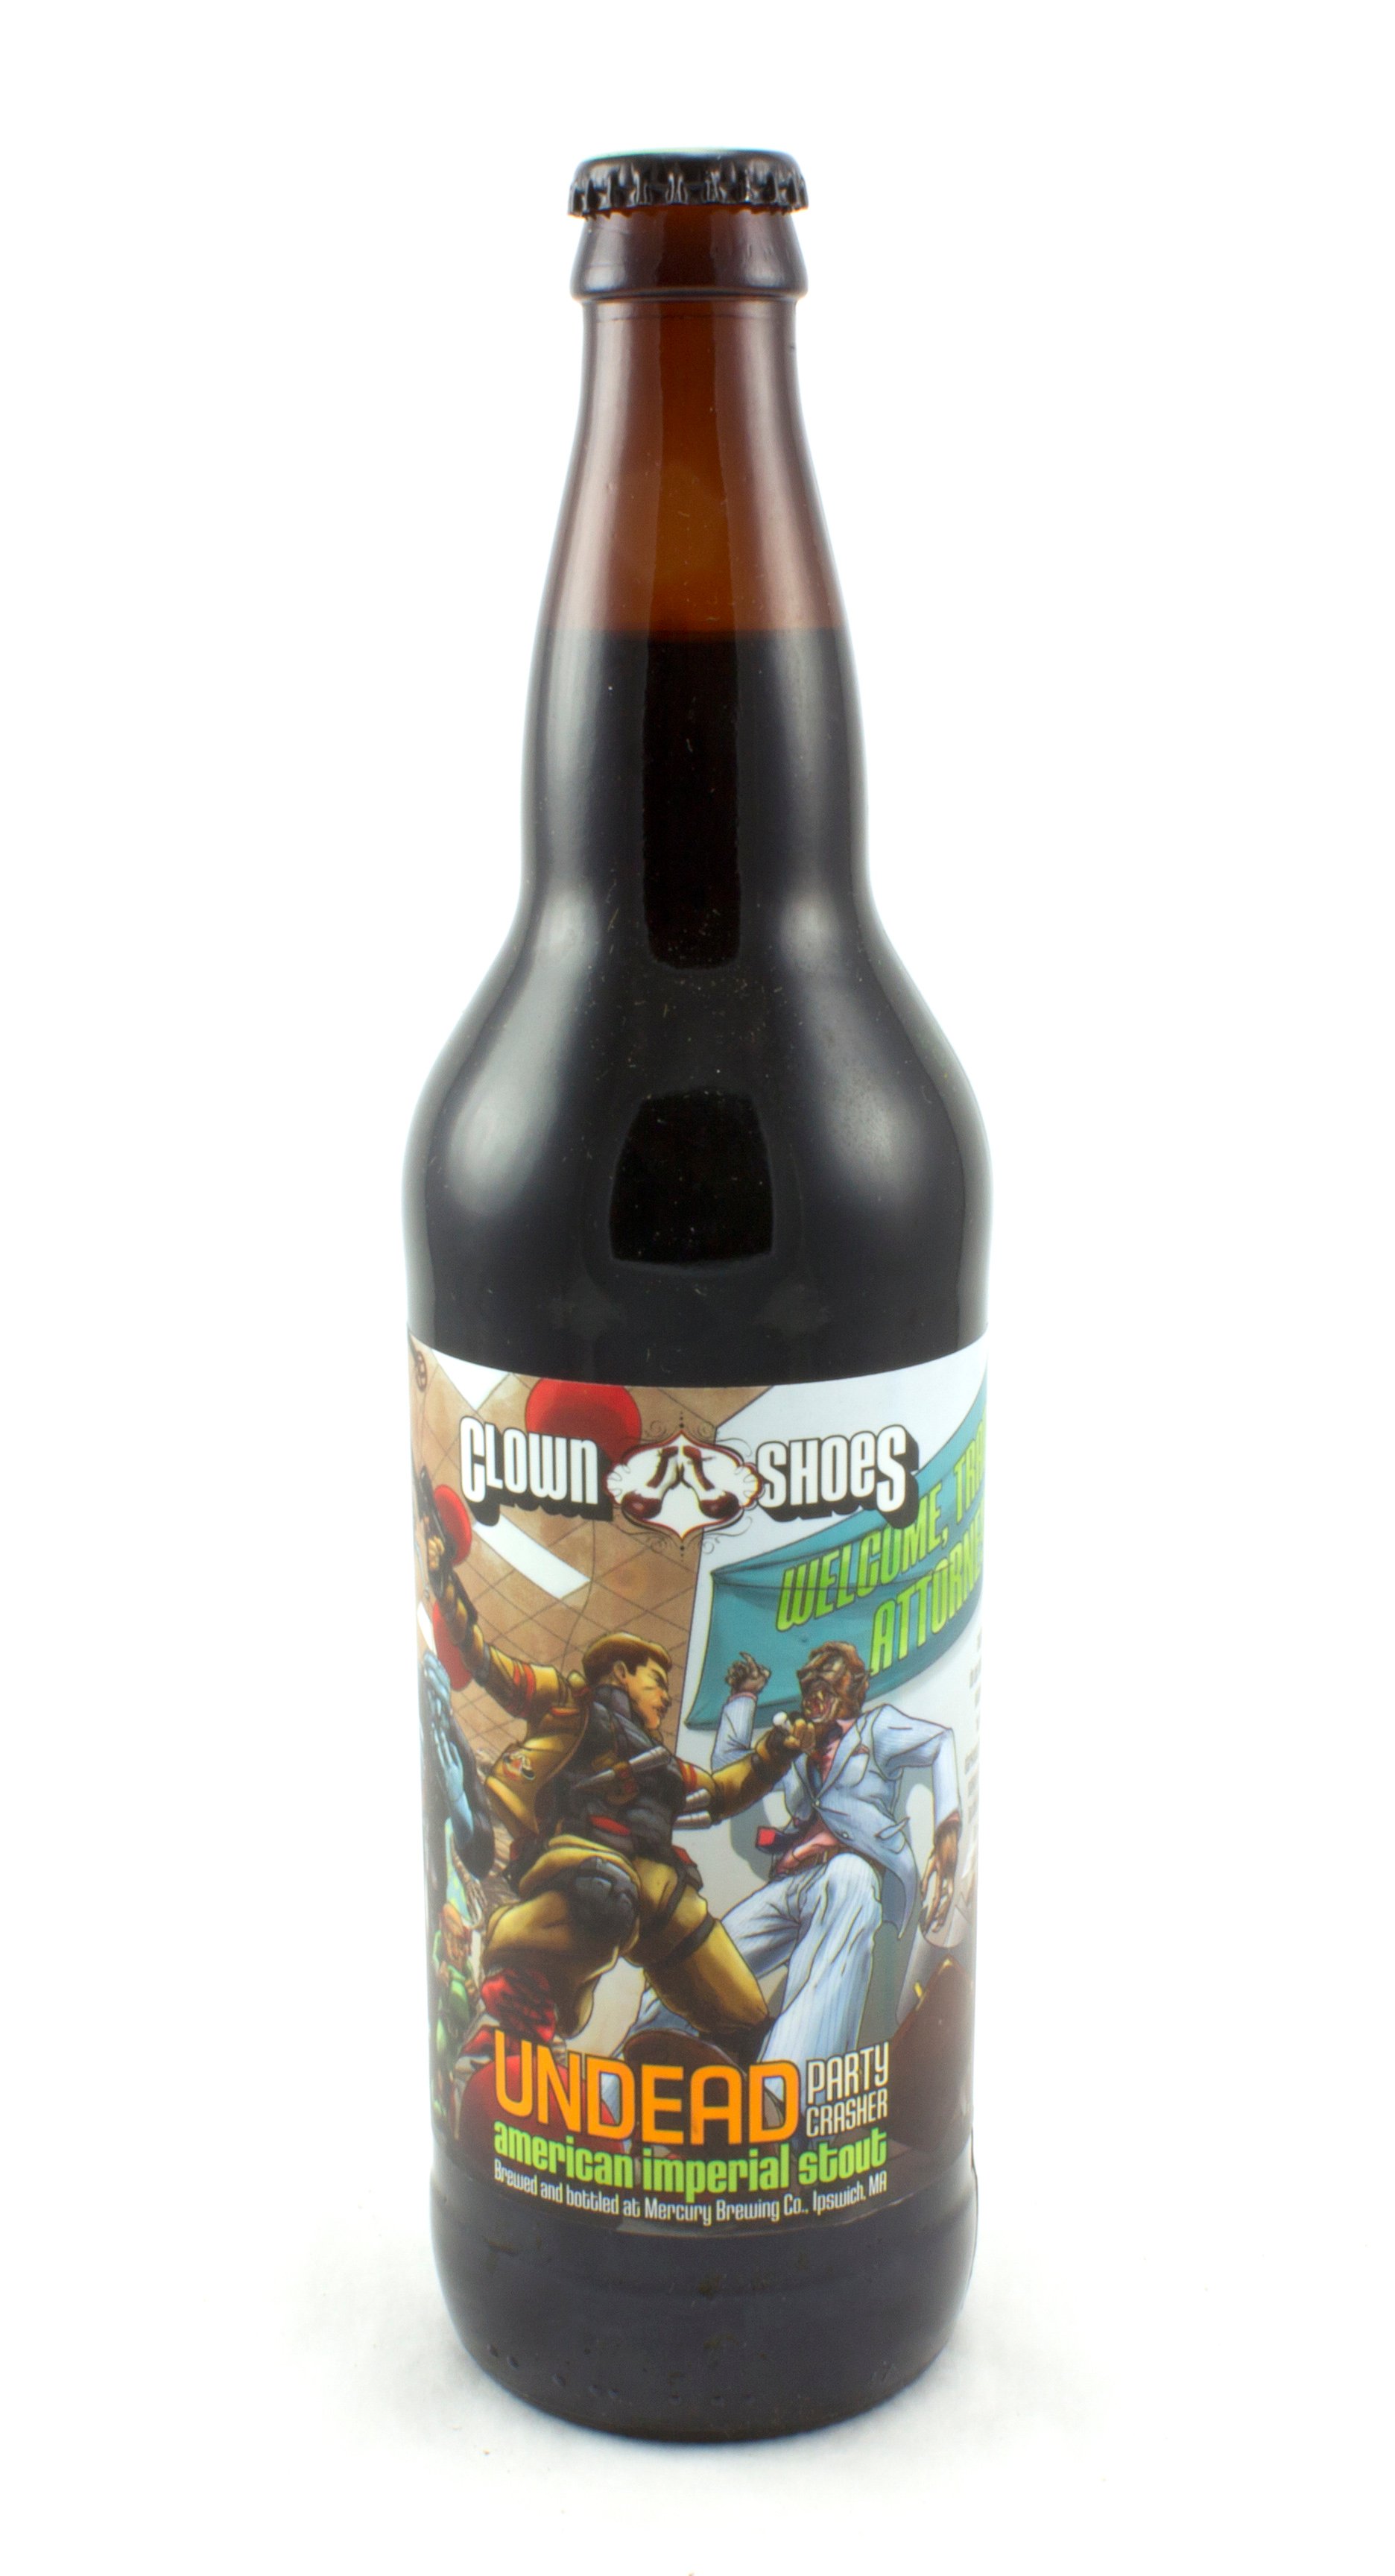 83 Sports Clown shoes undead stout for Girls